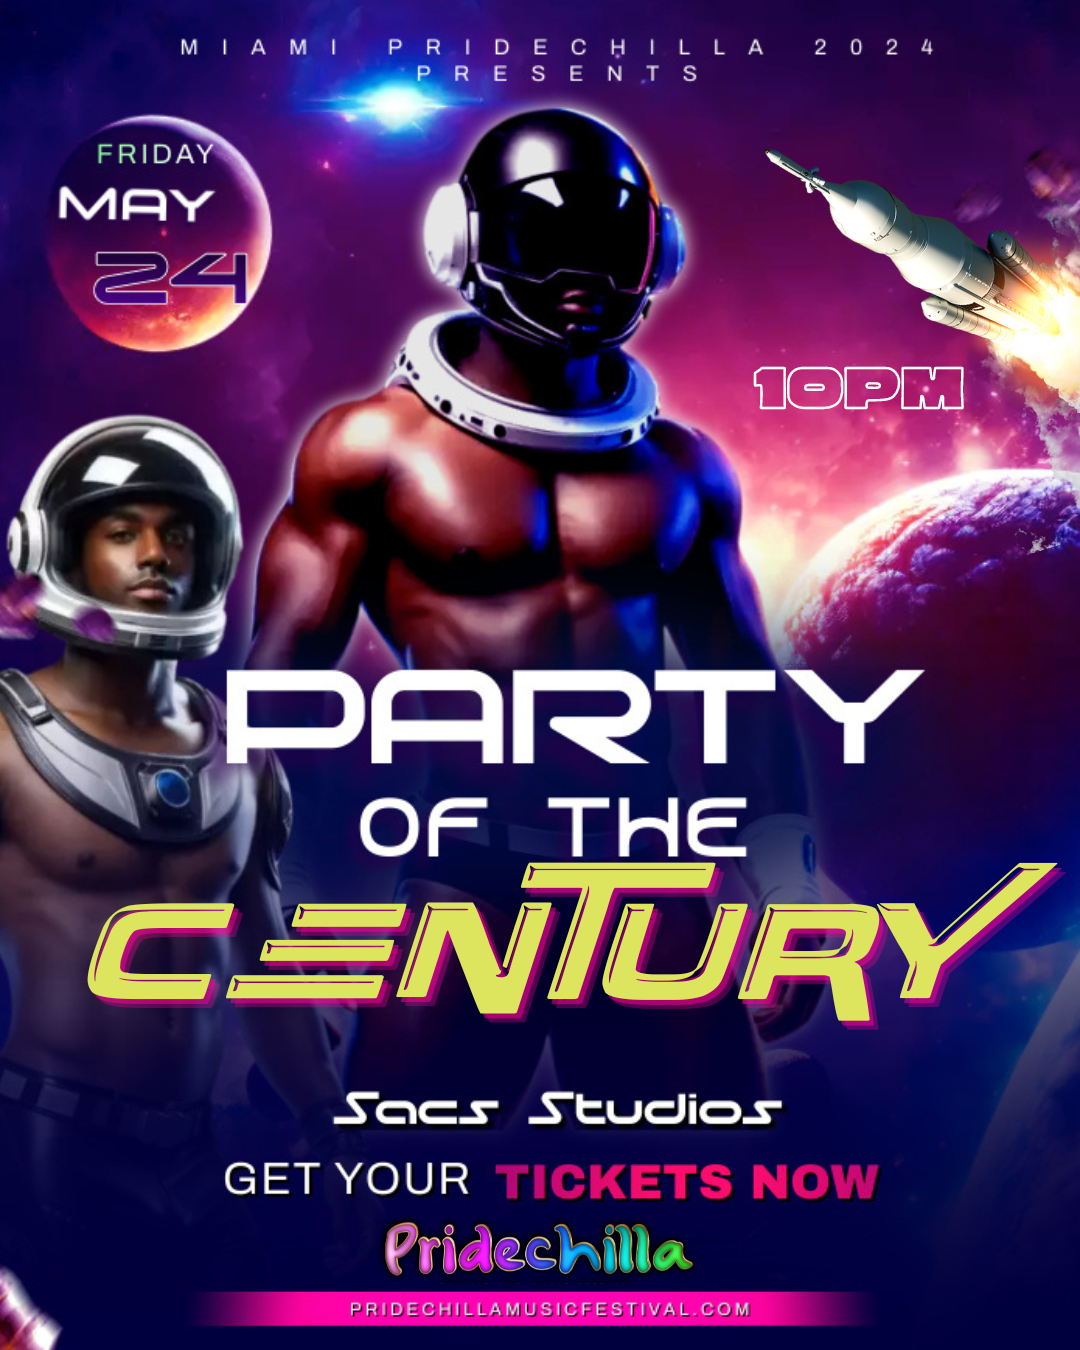 Party of the Century  on May 24, 22:00@Sacs Studios - Buy tickets and Get information on Afro Pride Federation pridechillamusicfestival